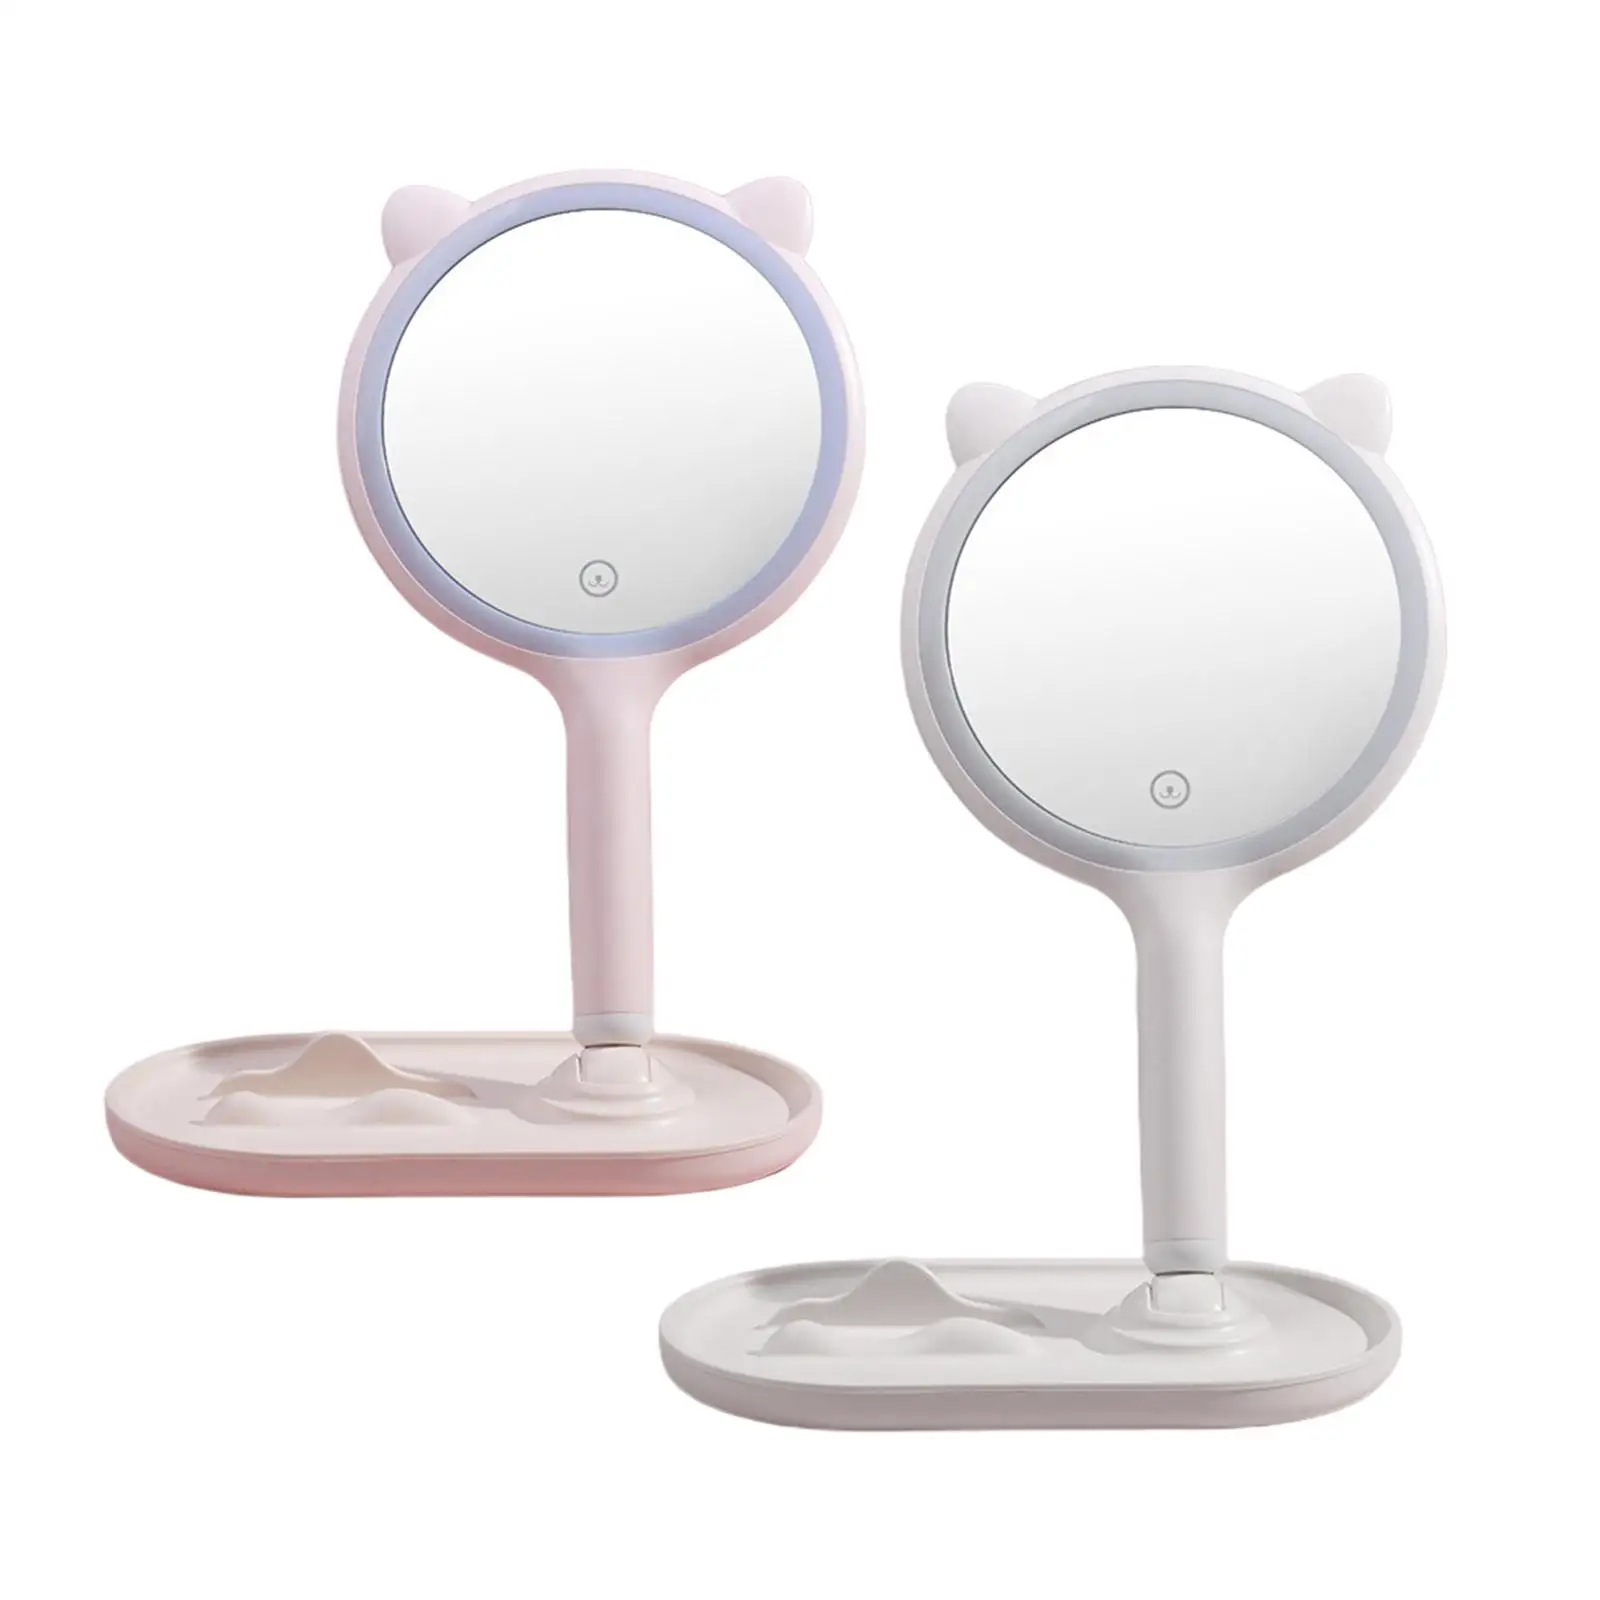 Lovely Desktop LED Makeup Mirror Double-Side Dimmable Table for Traveling